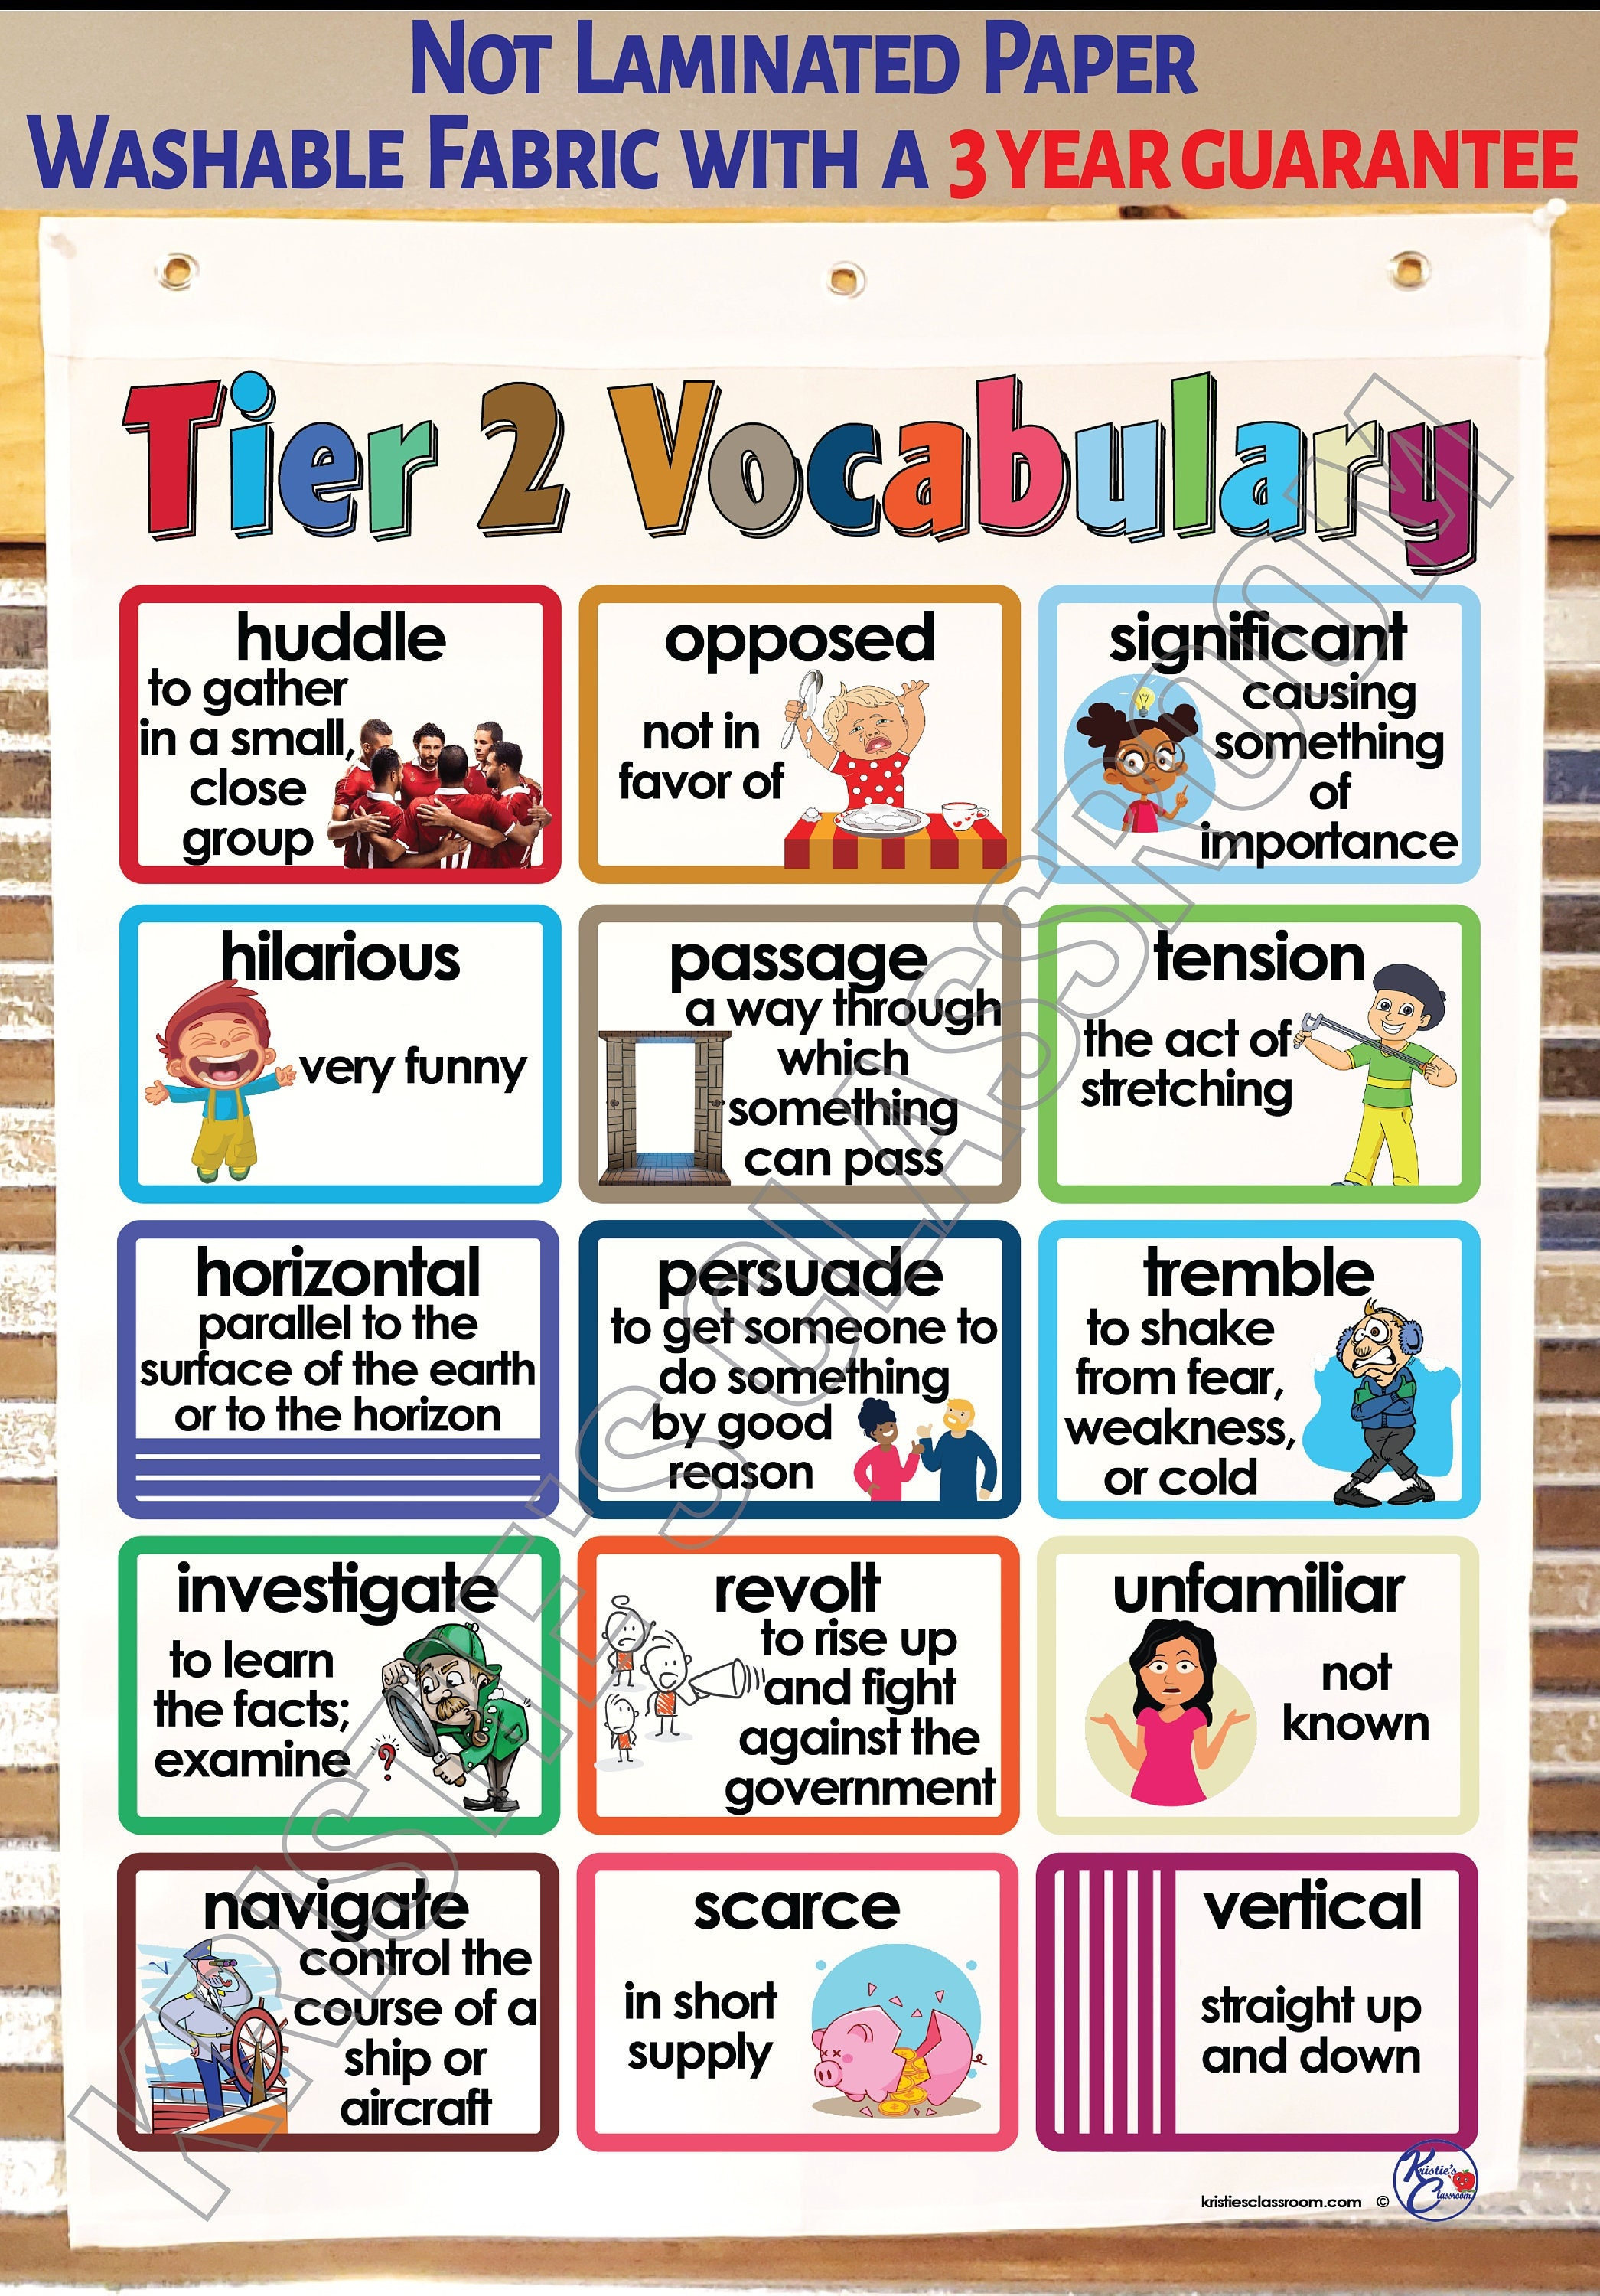 Tier 2 Vocabulary H-V, Printed on FABRIC Anchor Charts Are Durable Flag  Material. Washable, Foldable.3 Year Product Guarantee -  Canada